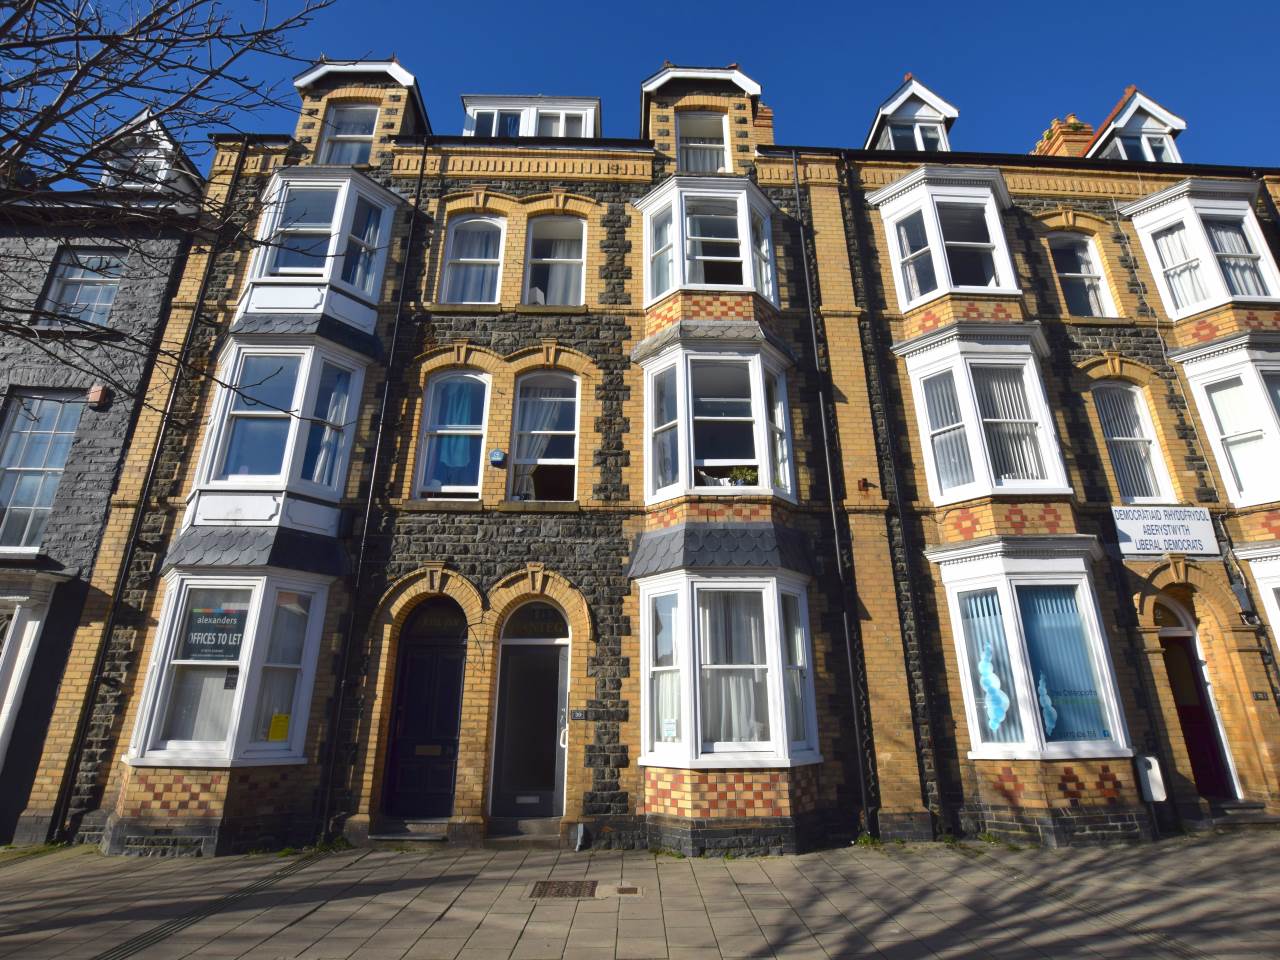 1 bed flat to rent in Aberystwyth, Ceredigion 0